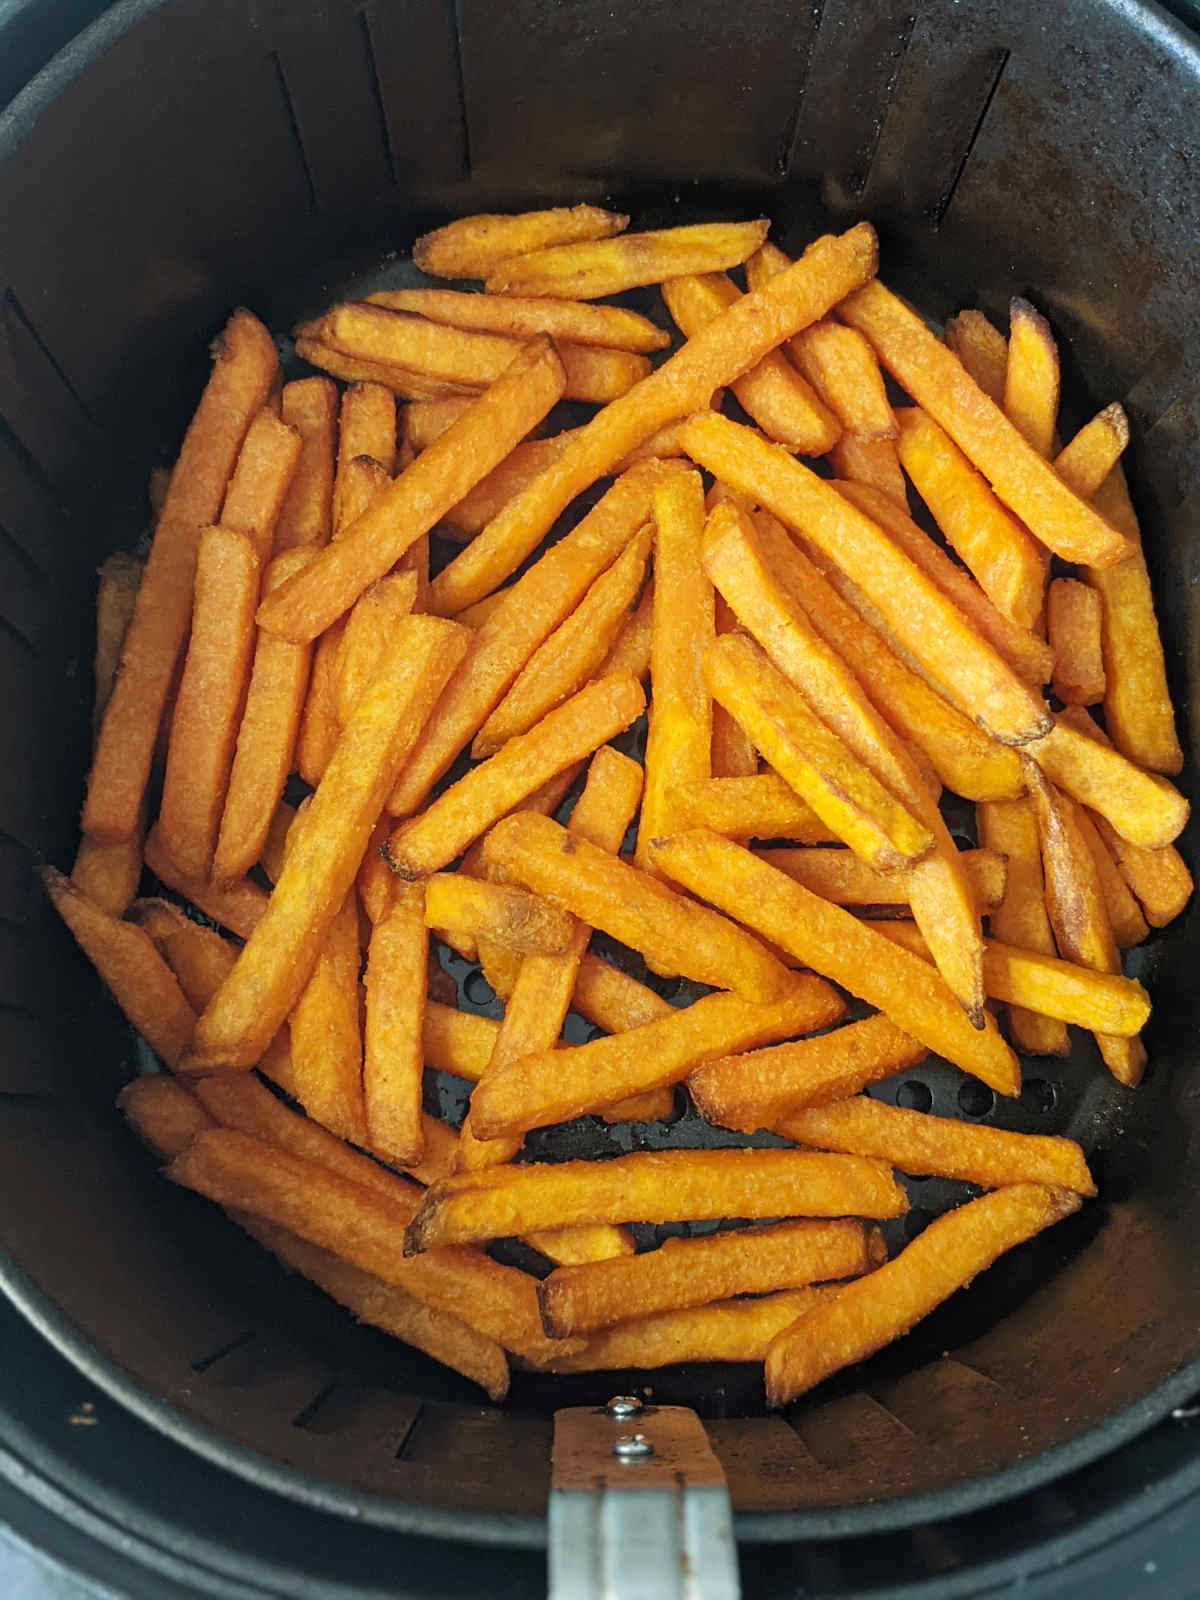 Cooked sweet potato fries in air fryer basket.